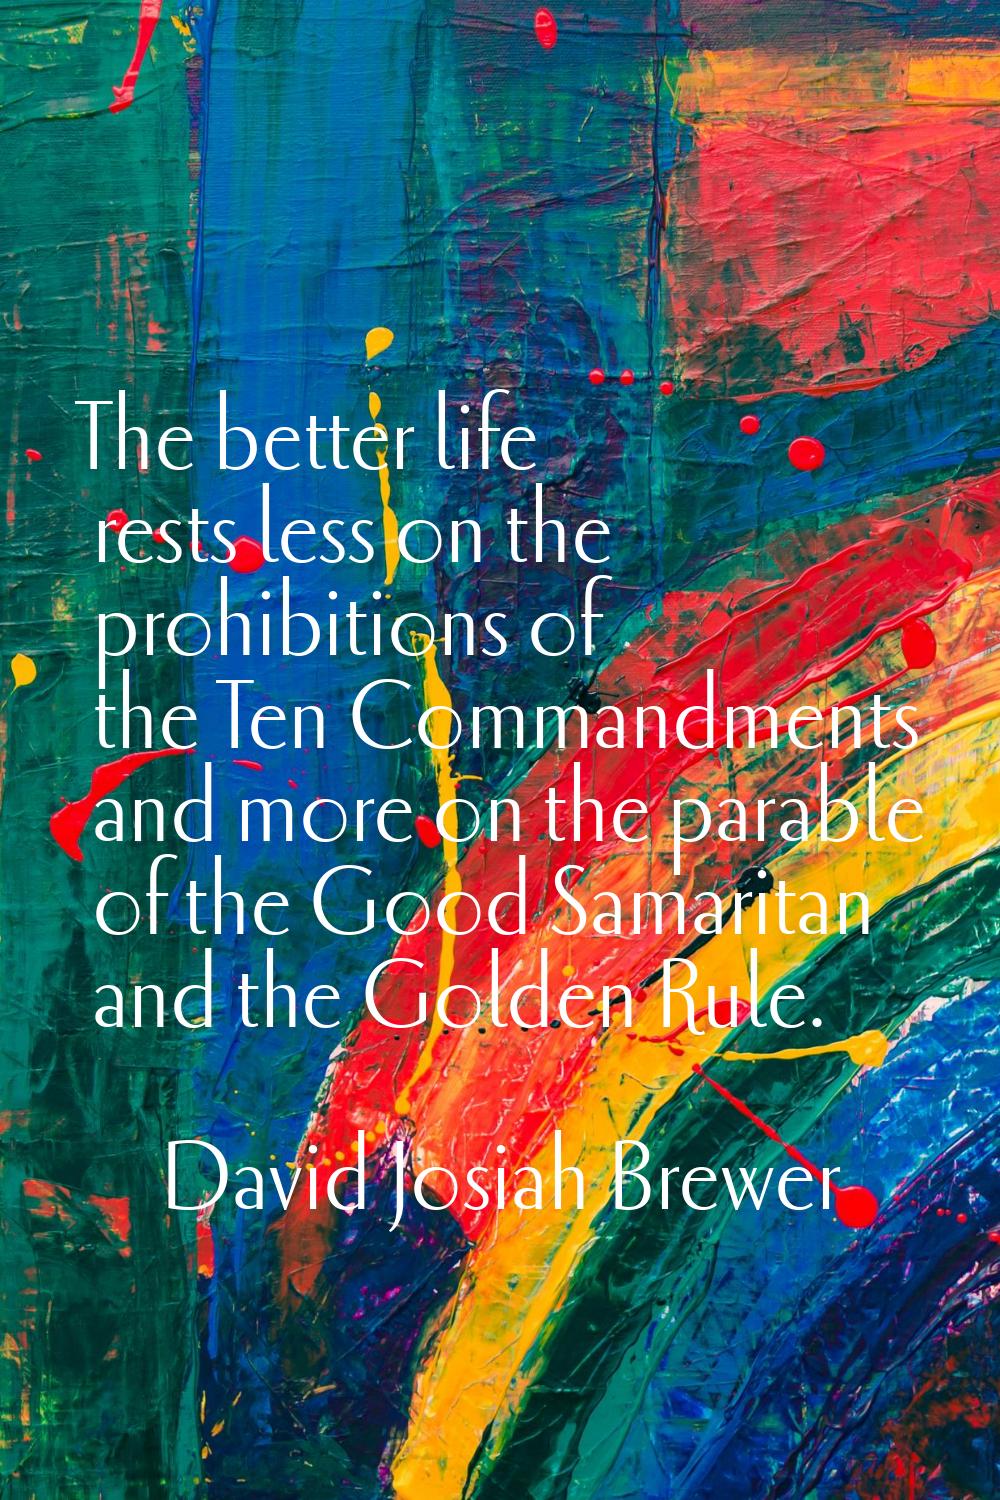 The better life rests less on the prohibitions of the Ten Commandments and more on the parable of t